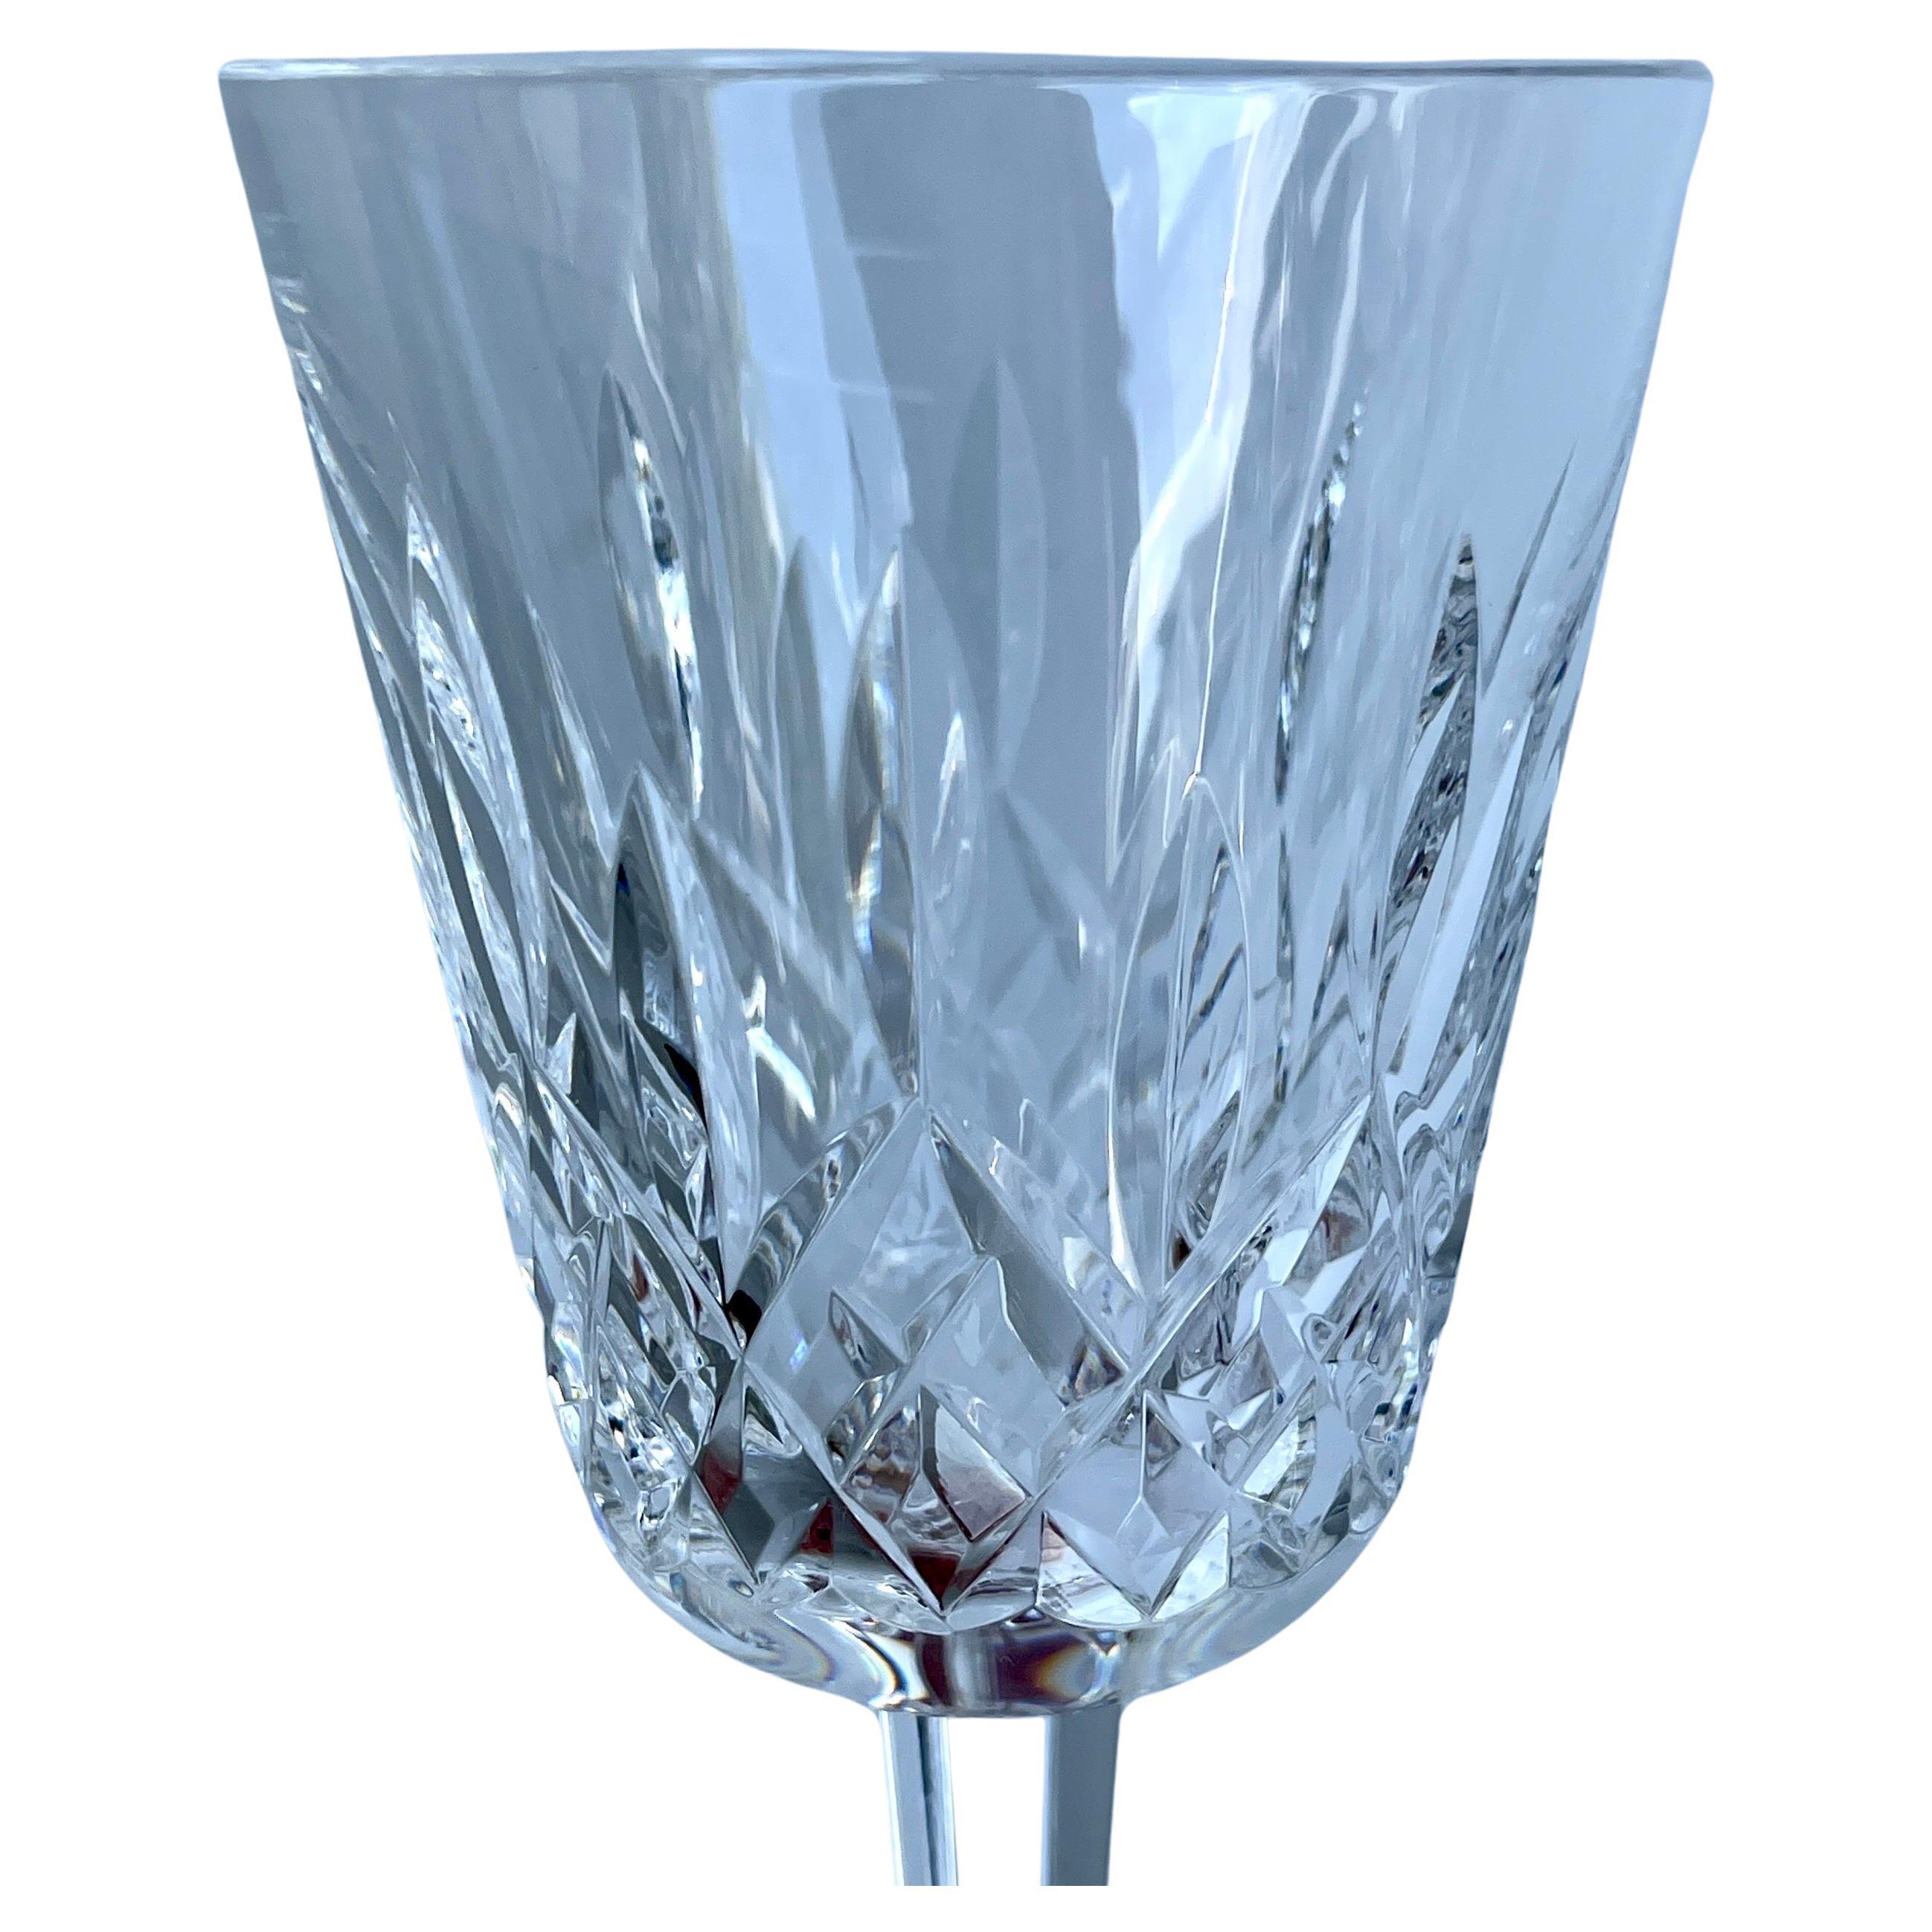 Vintage Lismore Waterford Crystal Goblet Water or Wine Glasses, set of 14

The famous Lismore pattern was created in 1952 by Miroslav Havel, Waterford’s Chief of Design who drew inspiration for the pattern’s signature diamond and wedge cuts from the